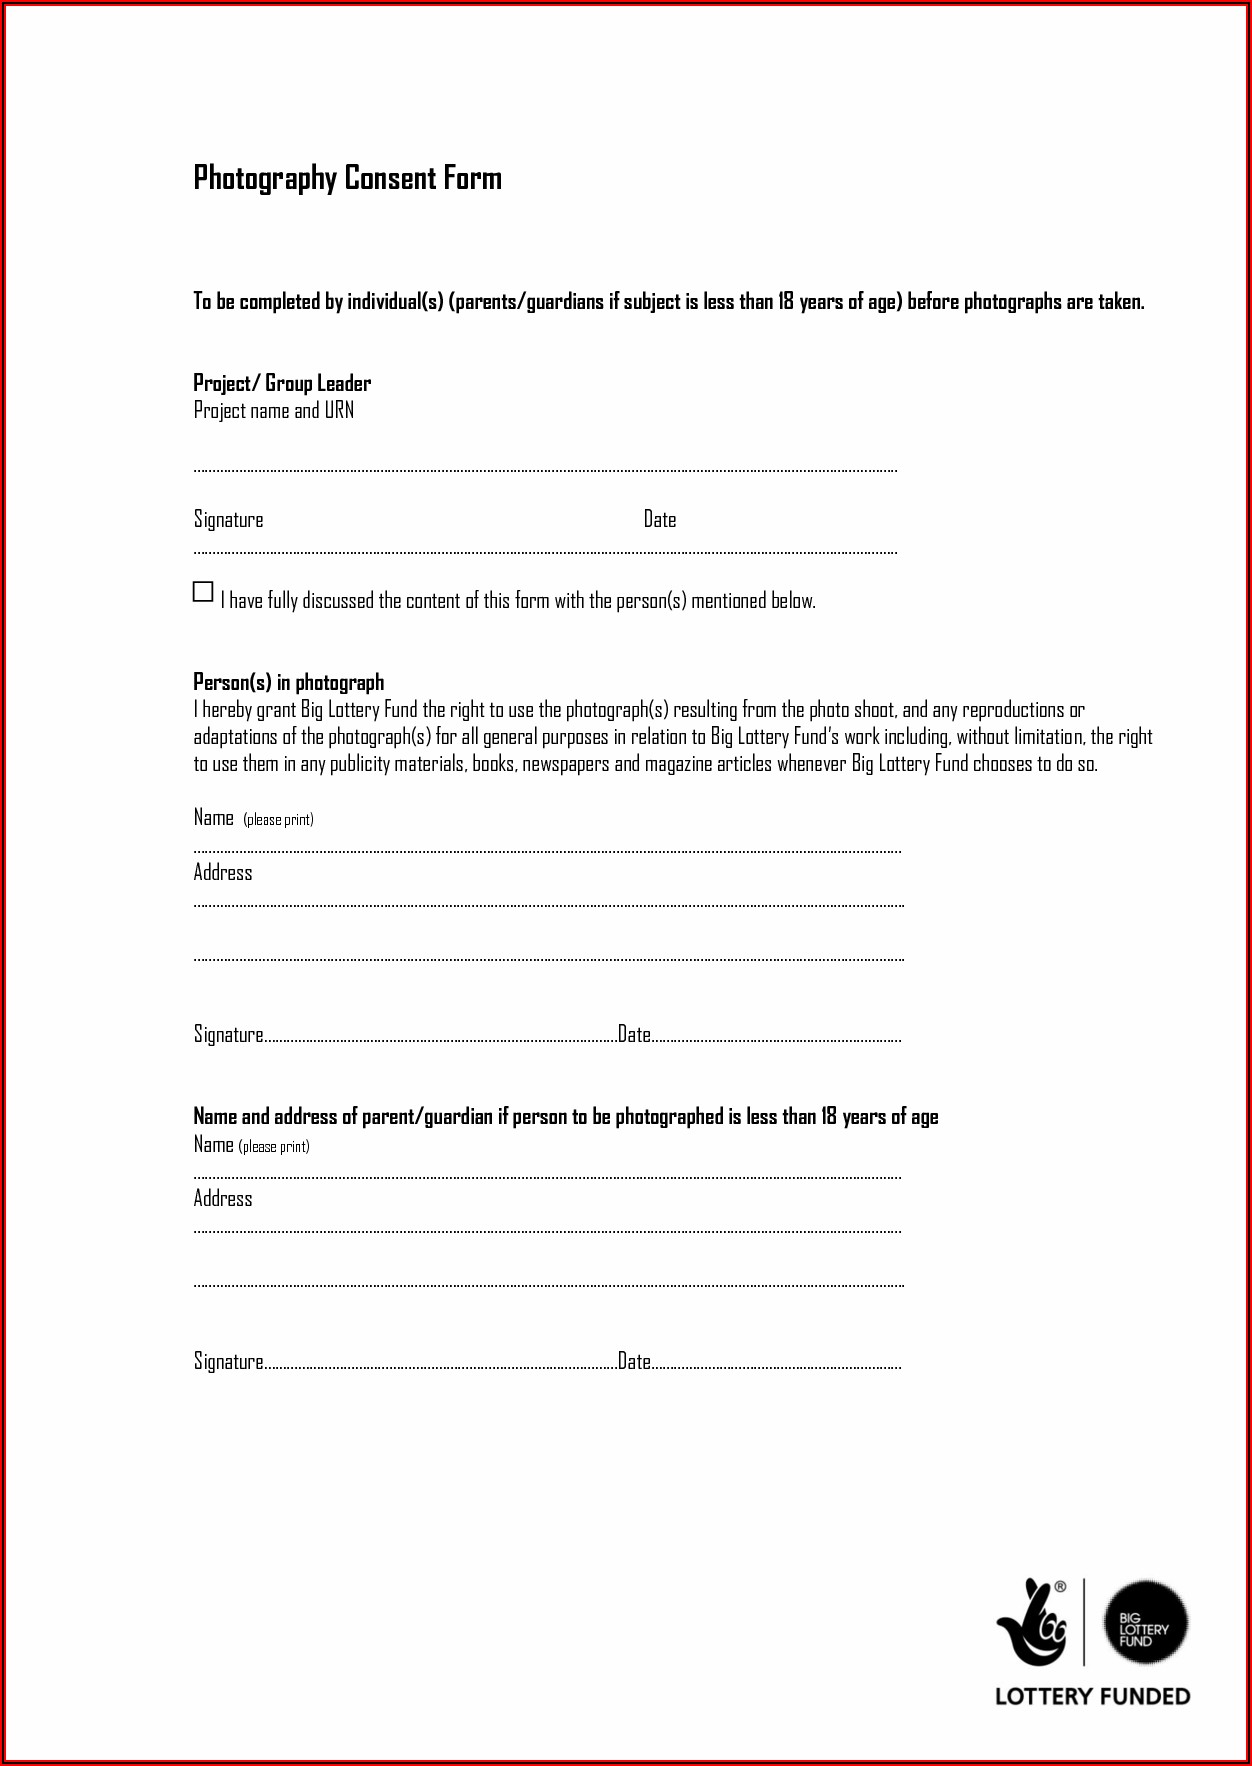 Photograph Consent Form Template